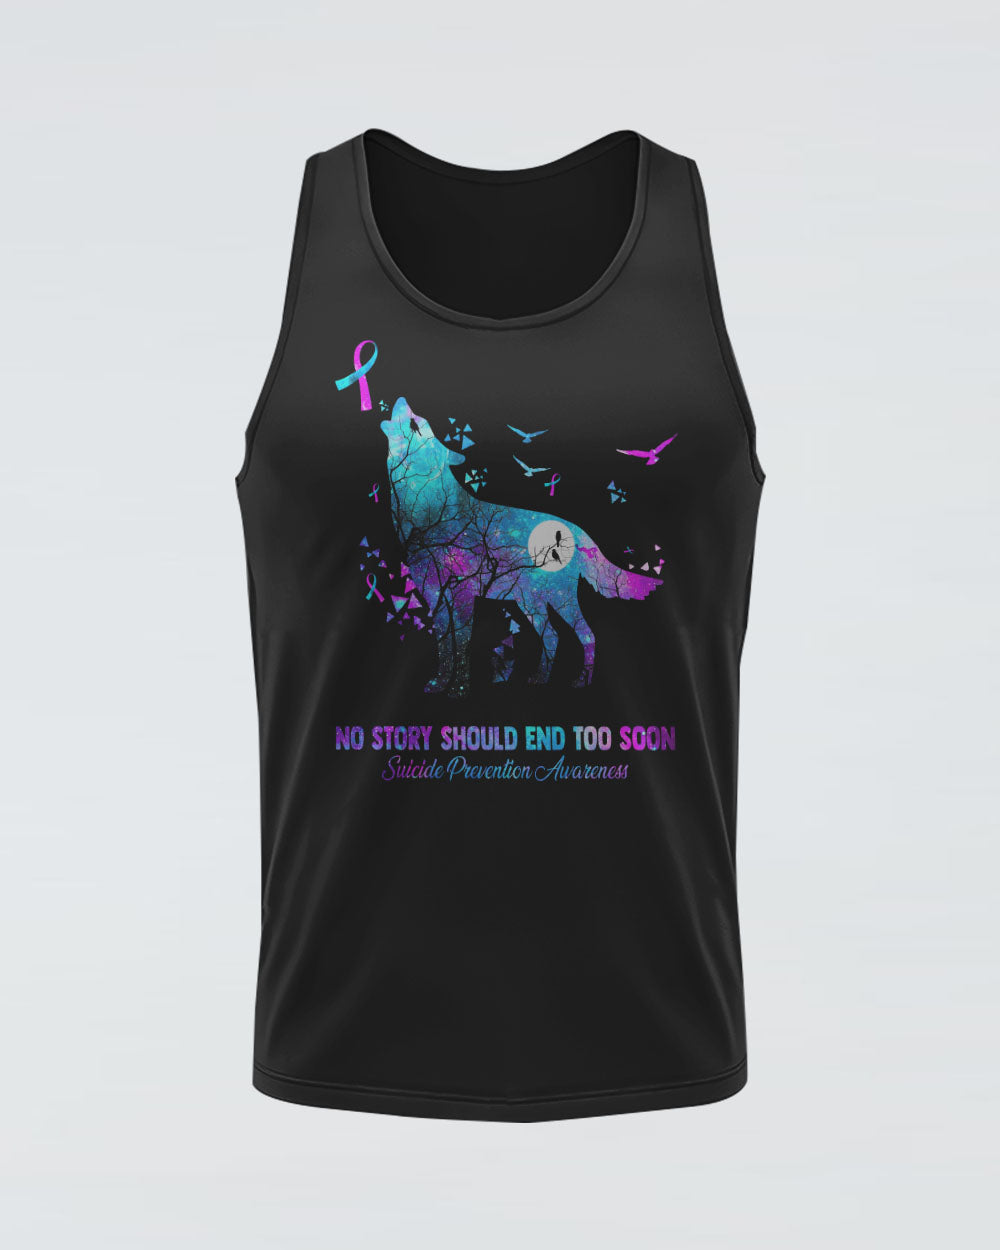 No Story Should End Too Soon Galaxy Wolf Women's Suicide Prevention Awareness Tanks